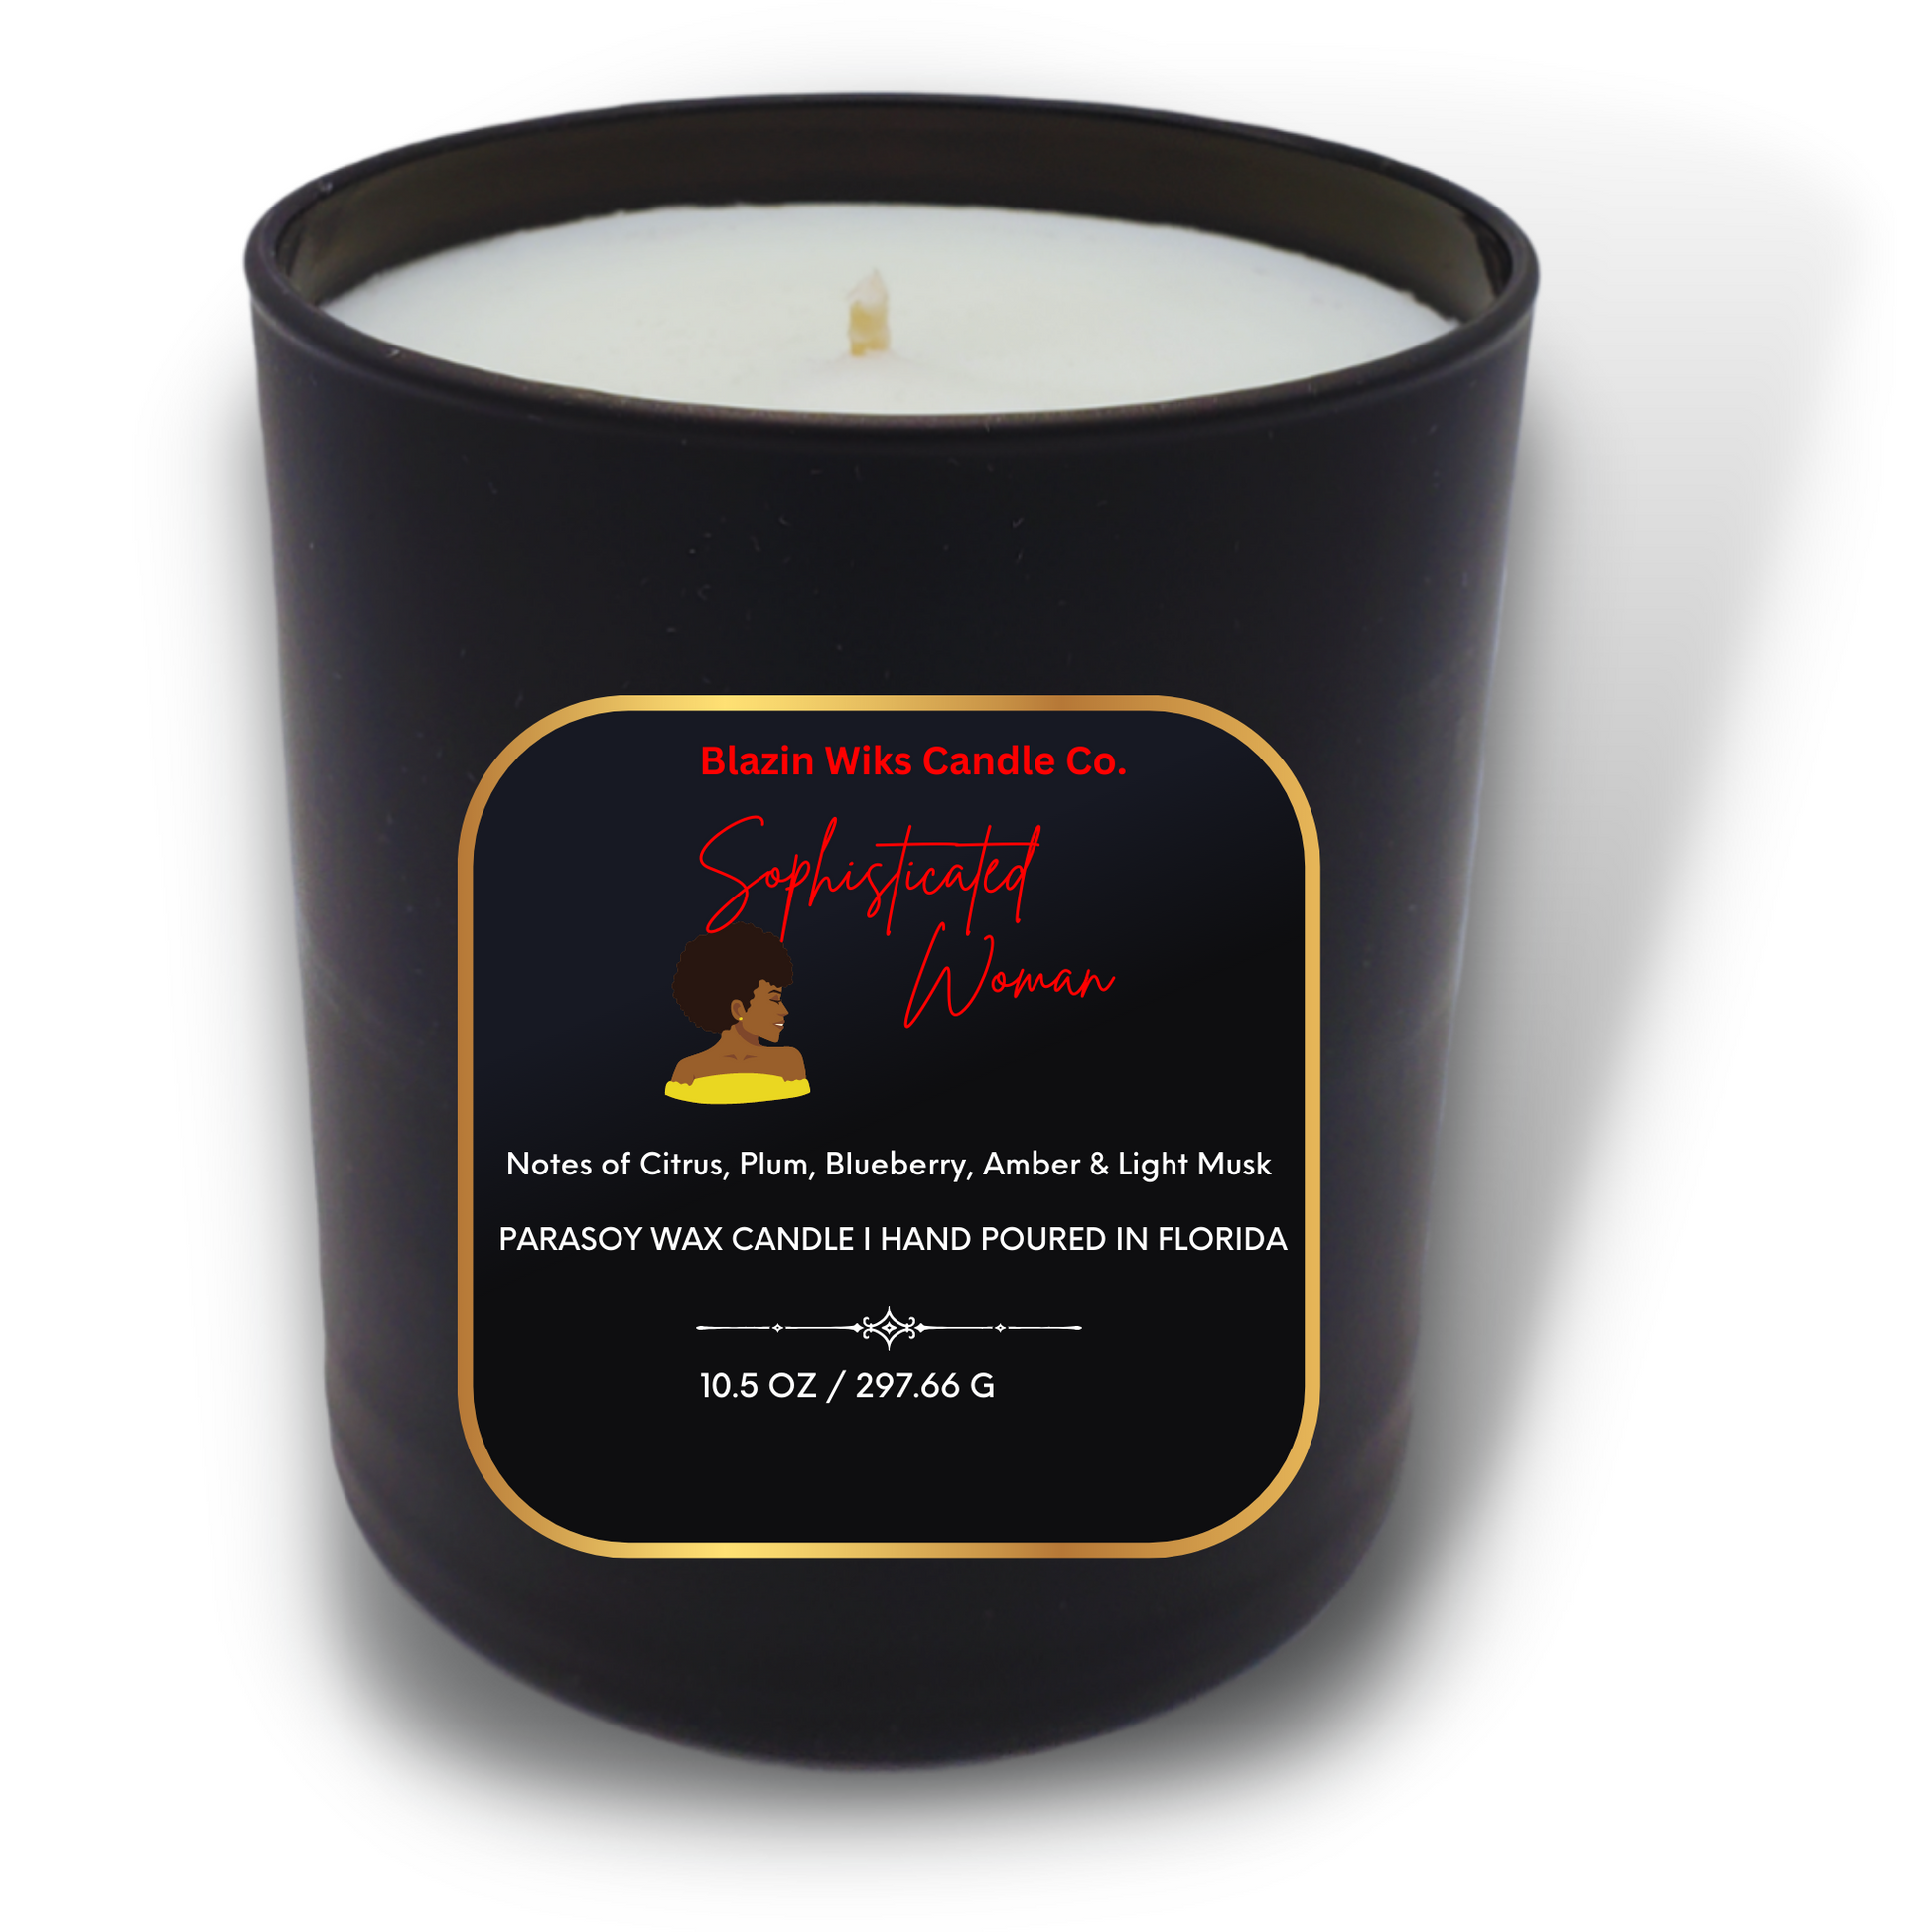 Sophisticated Woman Candle by Blazin Wiks Candle Co. 